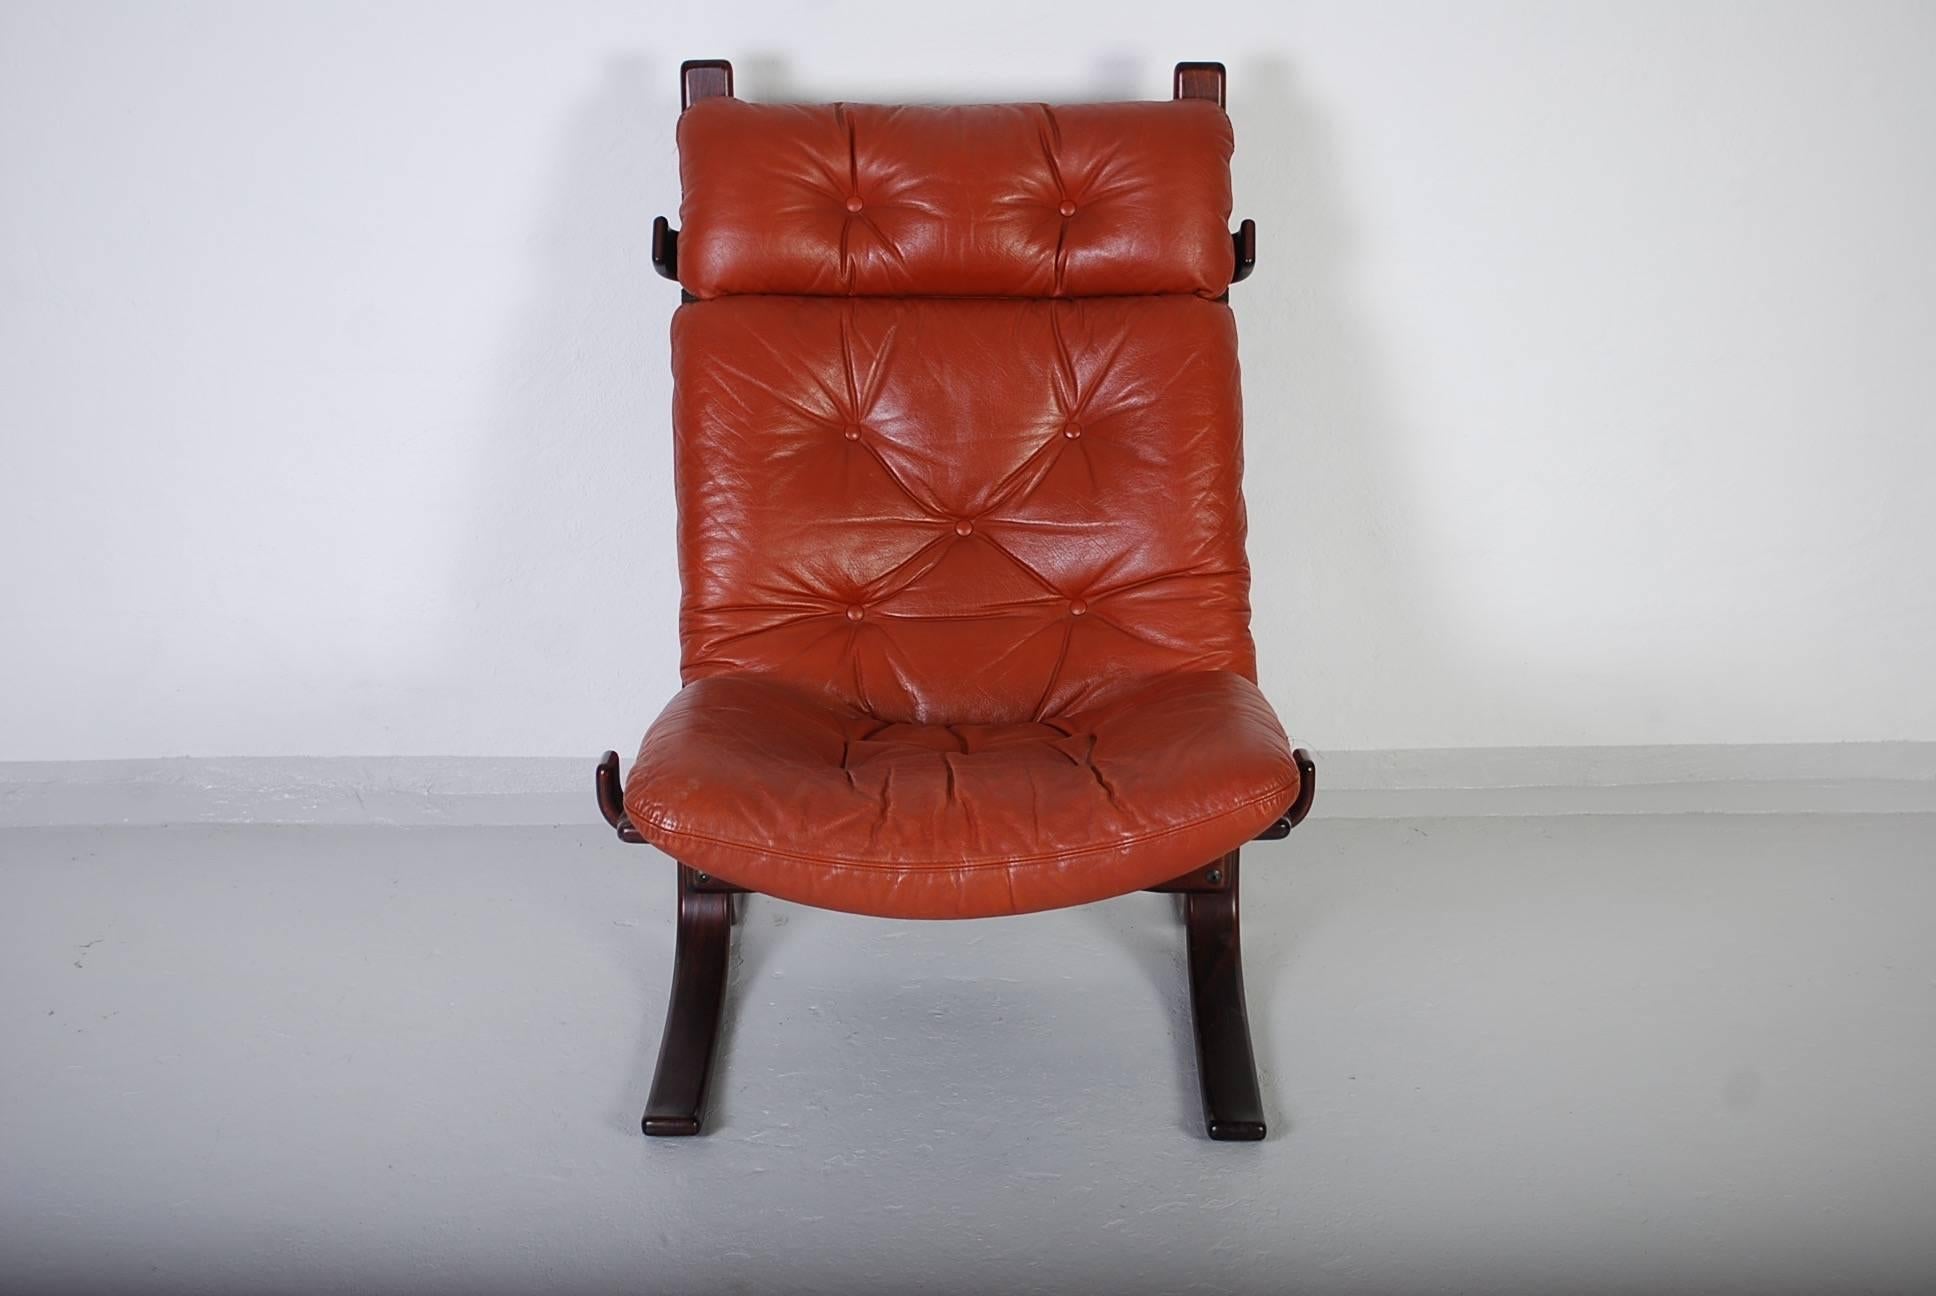 Red (burgundy) leather and bentwood lounge chair by Norwegian designer Ingmar Relling. The chair was produced by Westnofa during the 1970s. The chair is in very good vintage condition with minor signs of usage.